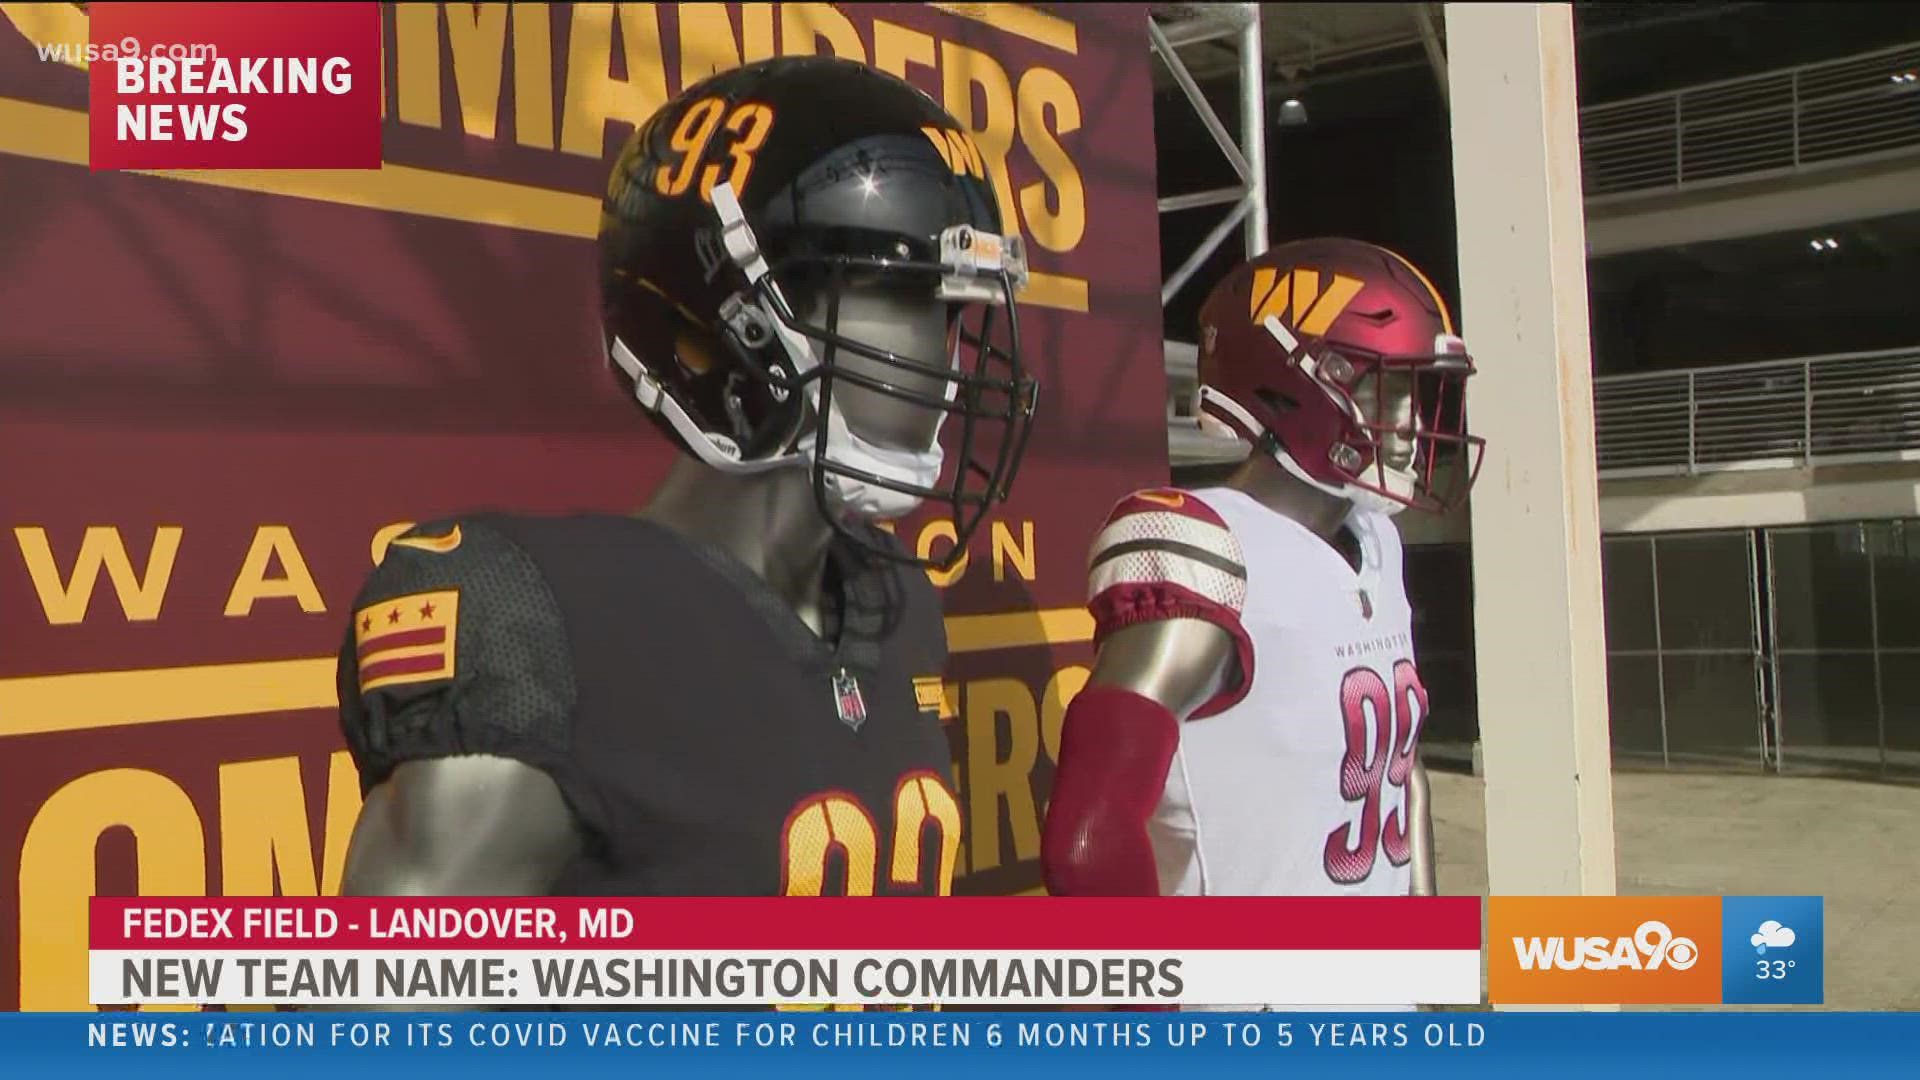 Kristen Berset-Harris shows off the new uniforms for the newly named Washington Commanders at Fed Ex Field.